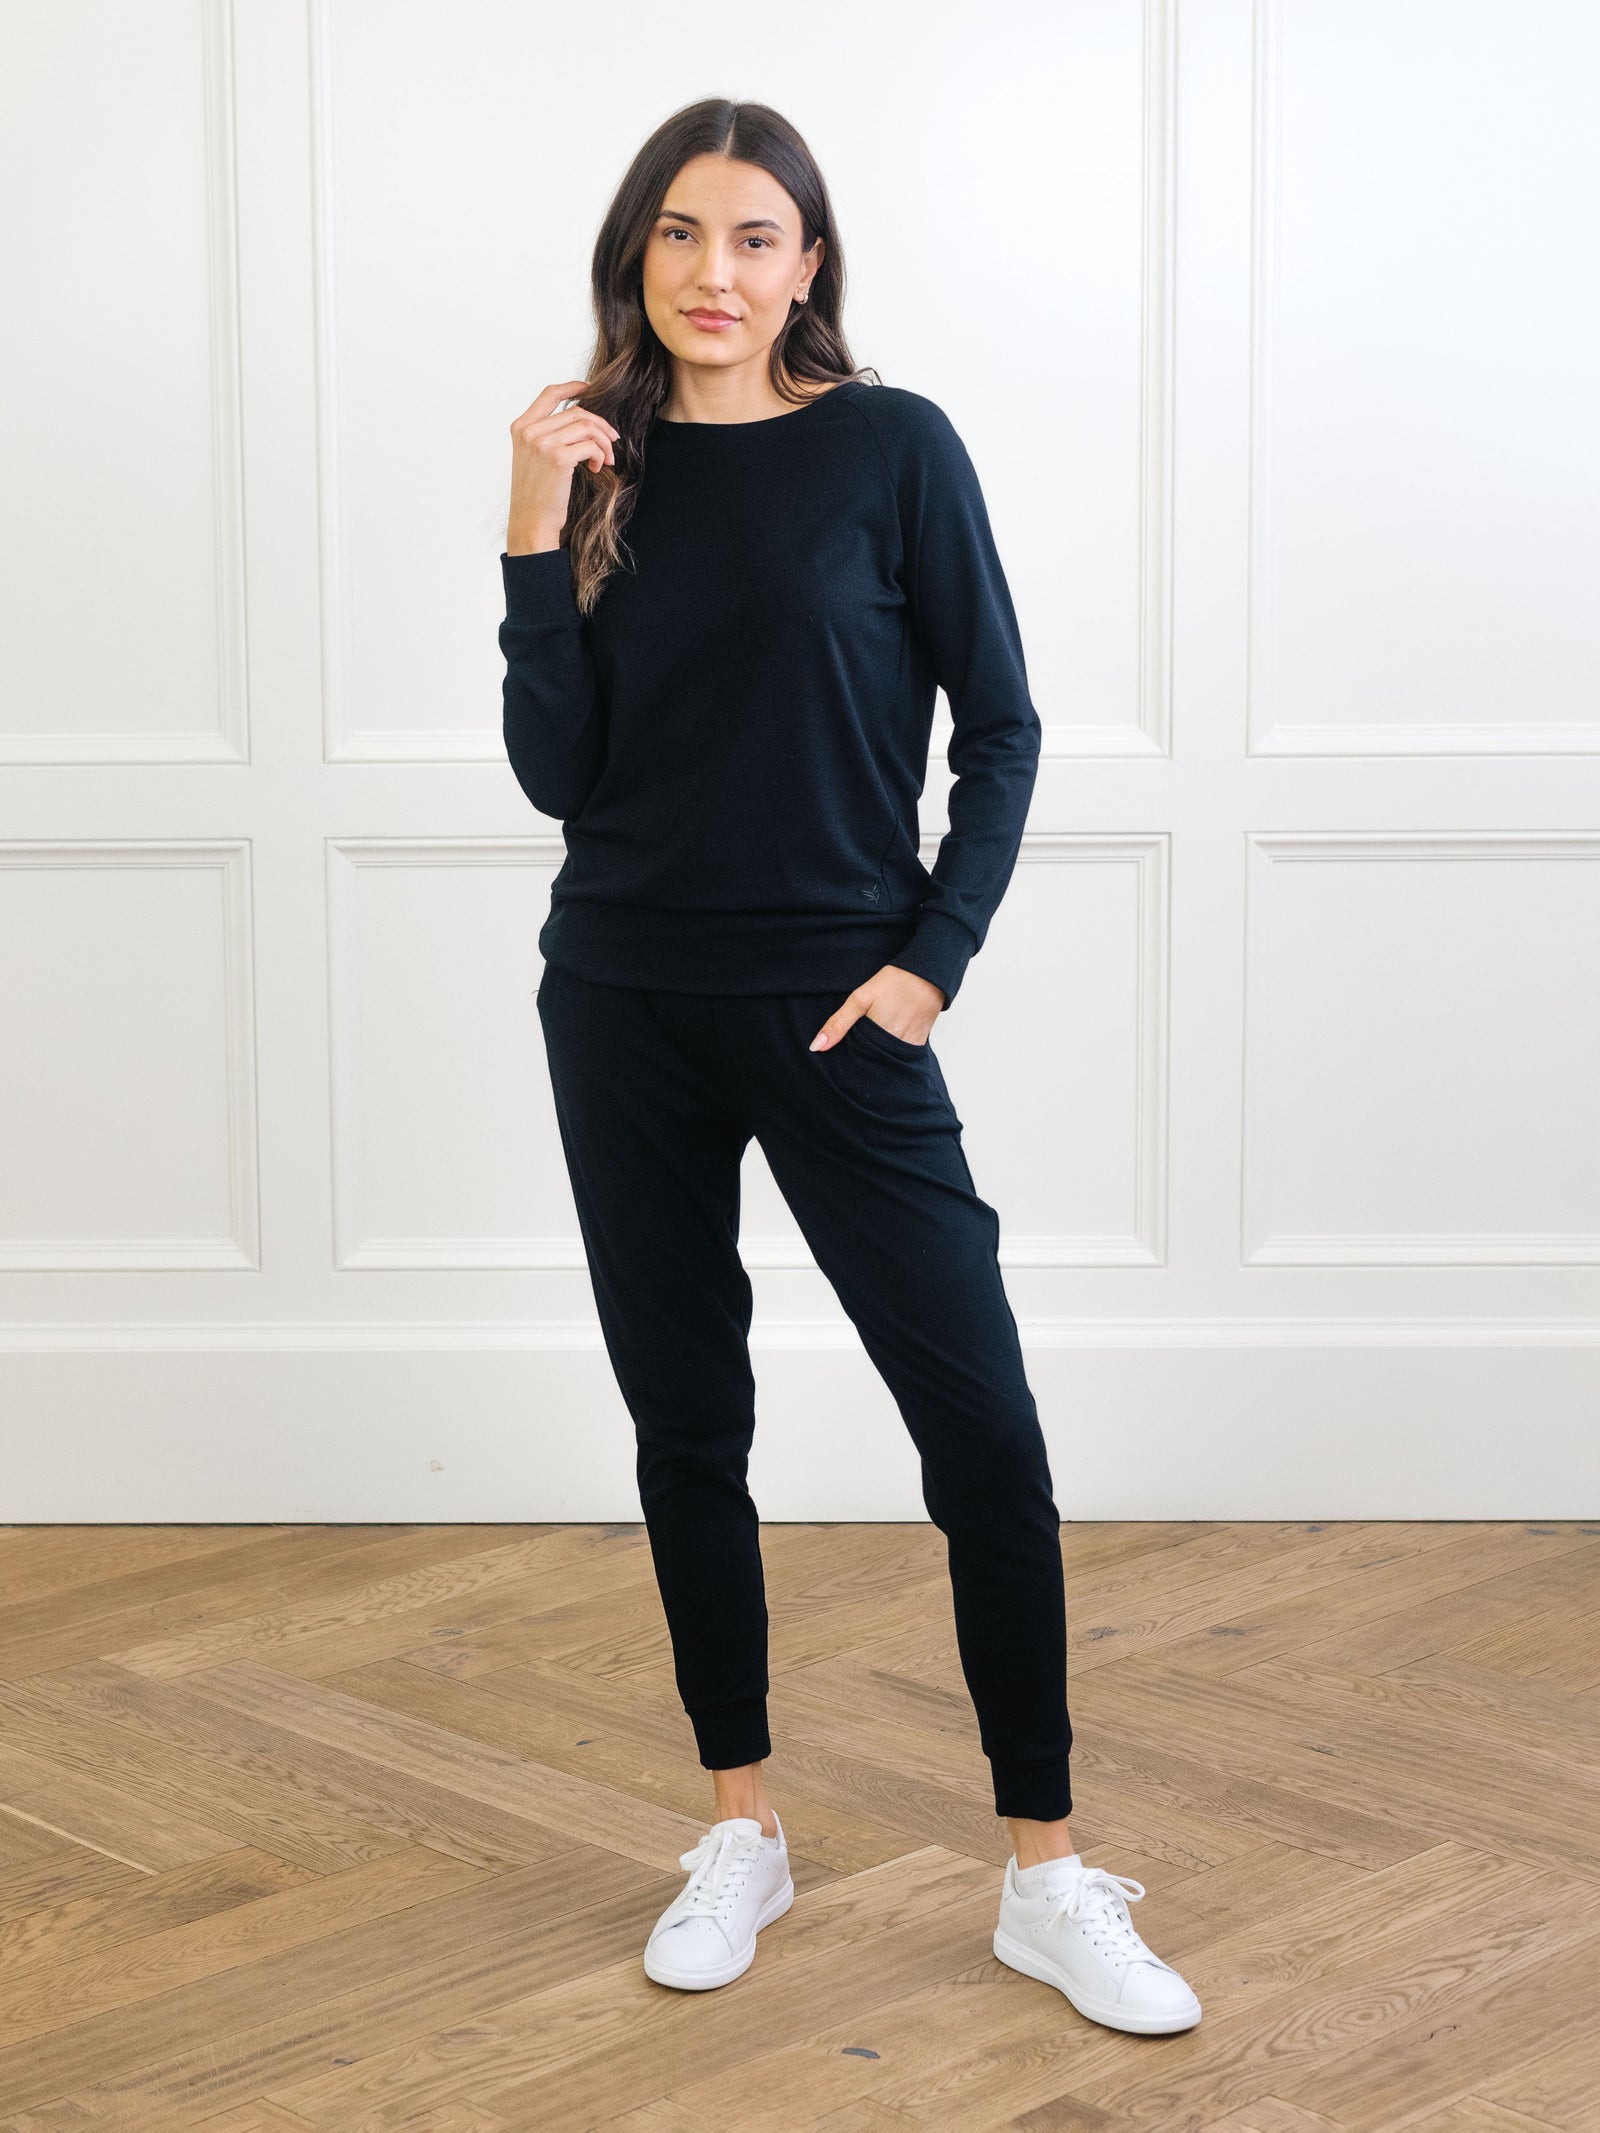 Black Joggers for Women - Cosy & Warm